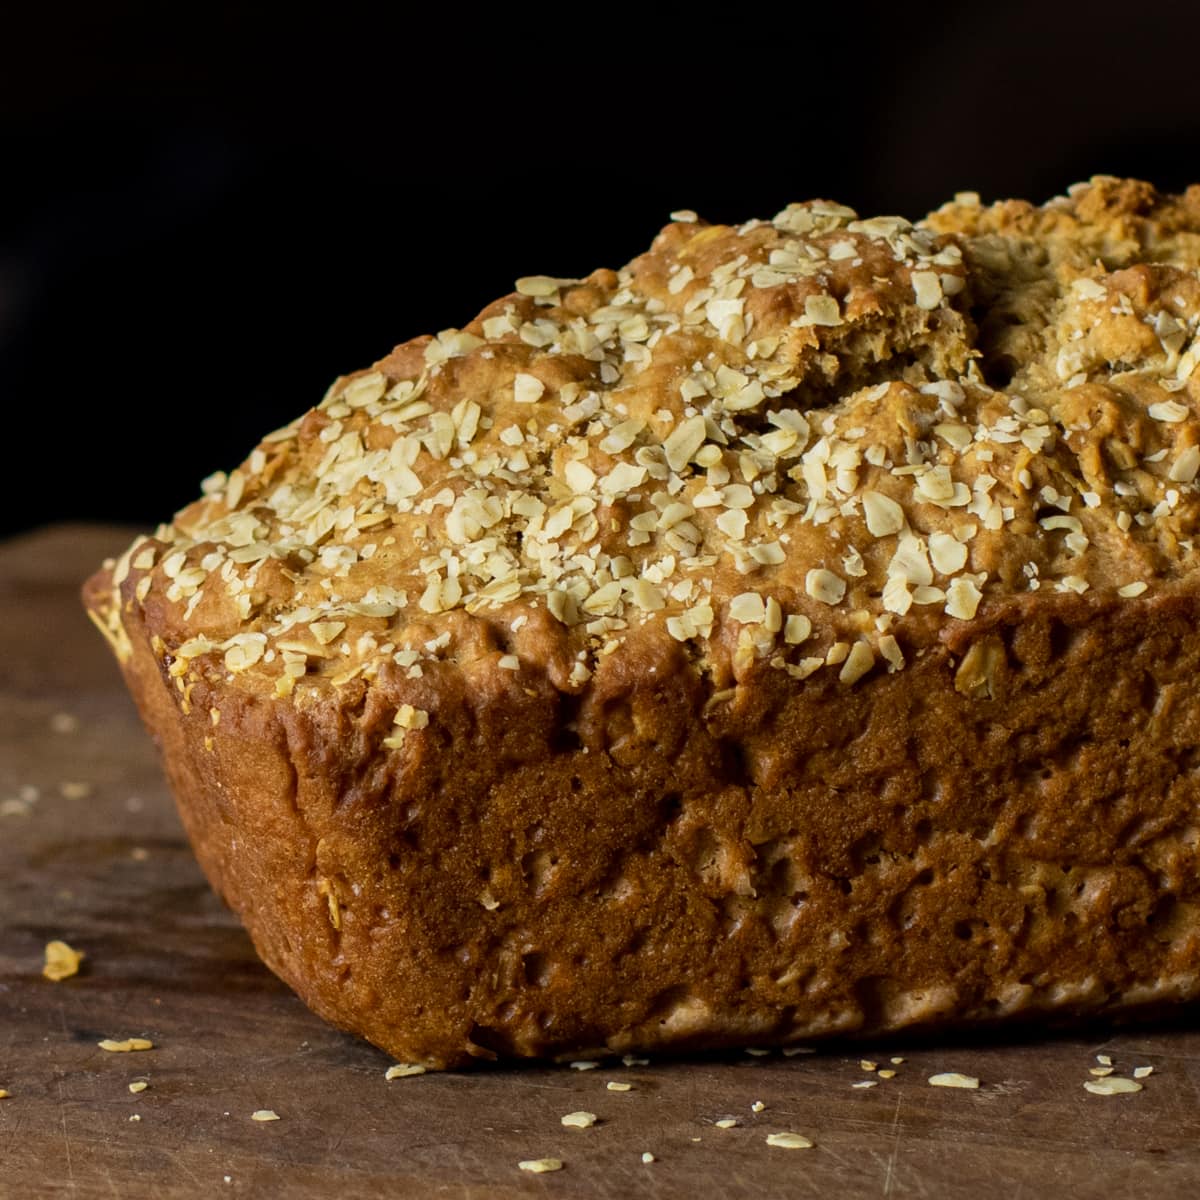 A freshly baked loaf of bread with oats sprinkled on top.